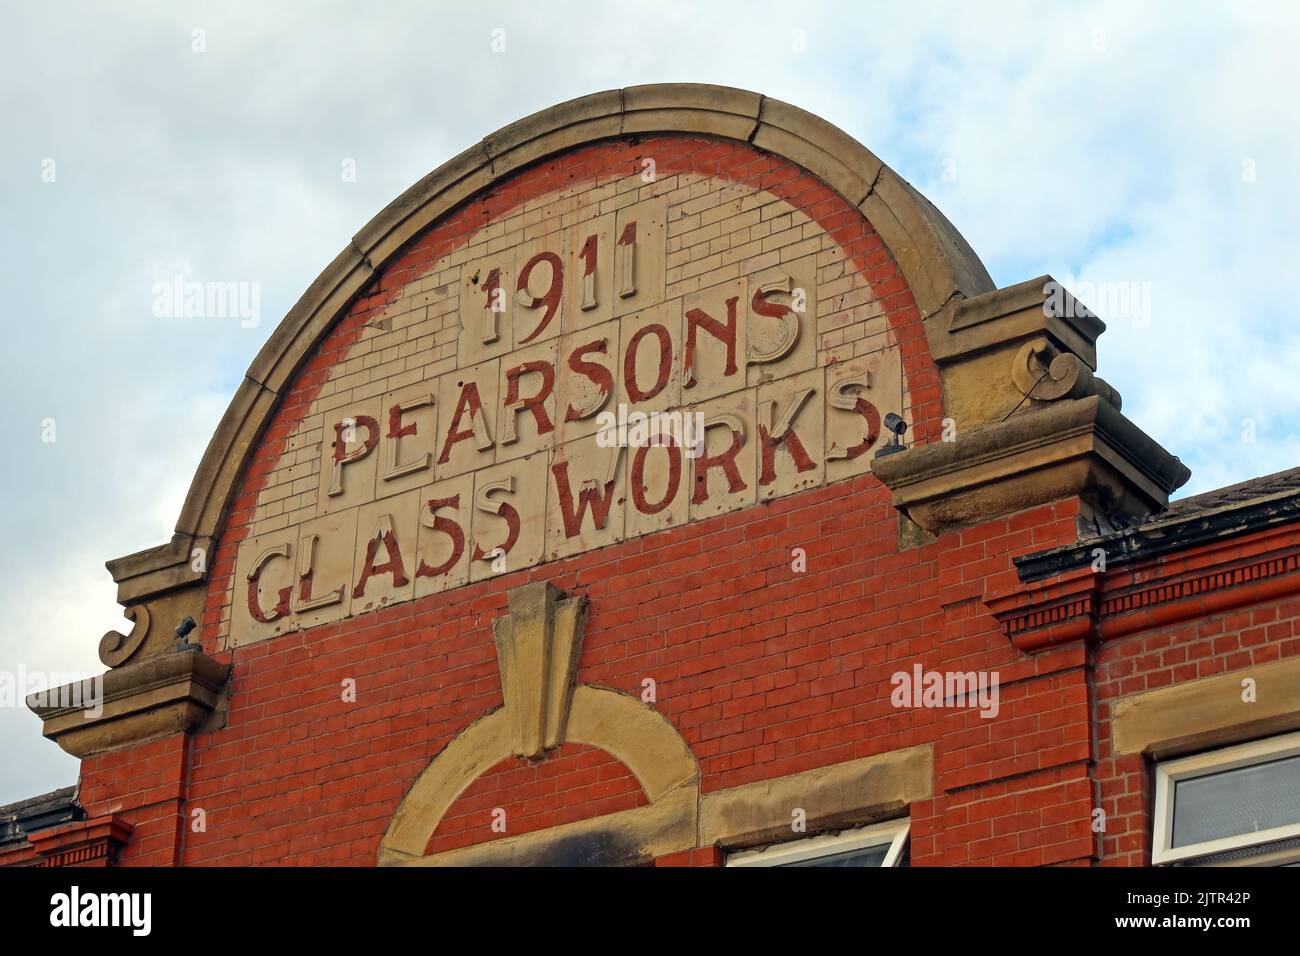 1911 Pearsons Glass Works Building - 2, Empire Street, près de Cheetham Hill Road, Manchester, Angleterre, Royaume-Uni, M3 1JA, Aujourd'hui, l'Empire House Banqueting Banque D'Images